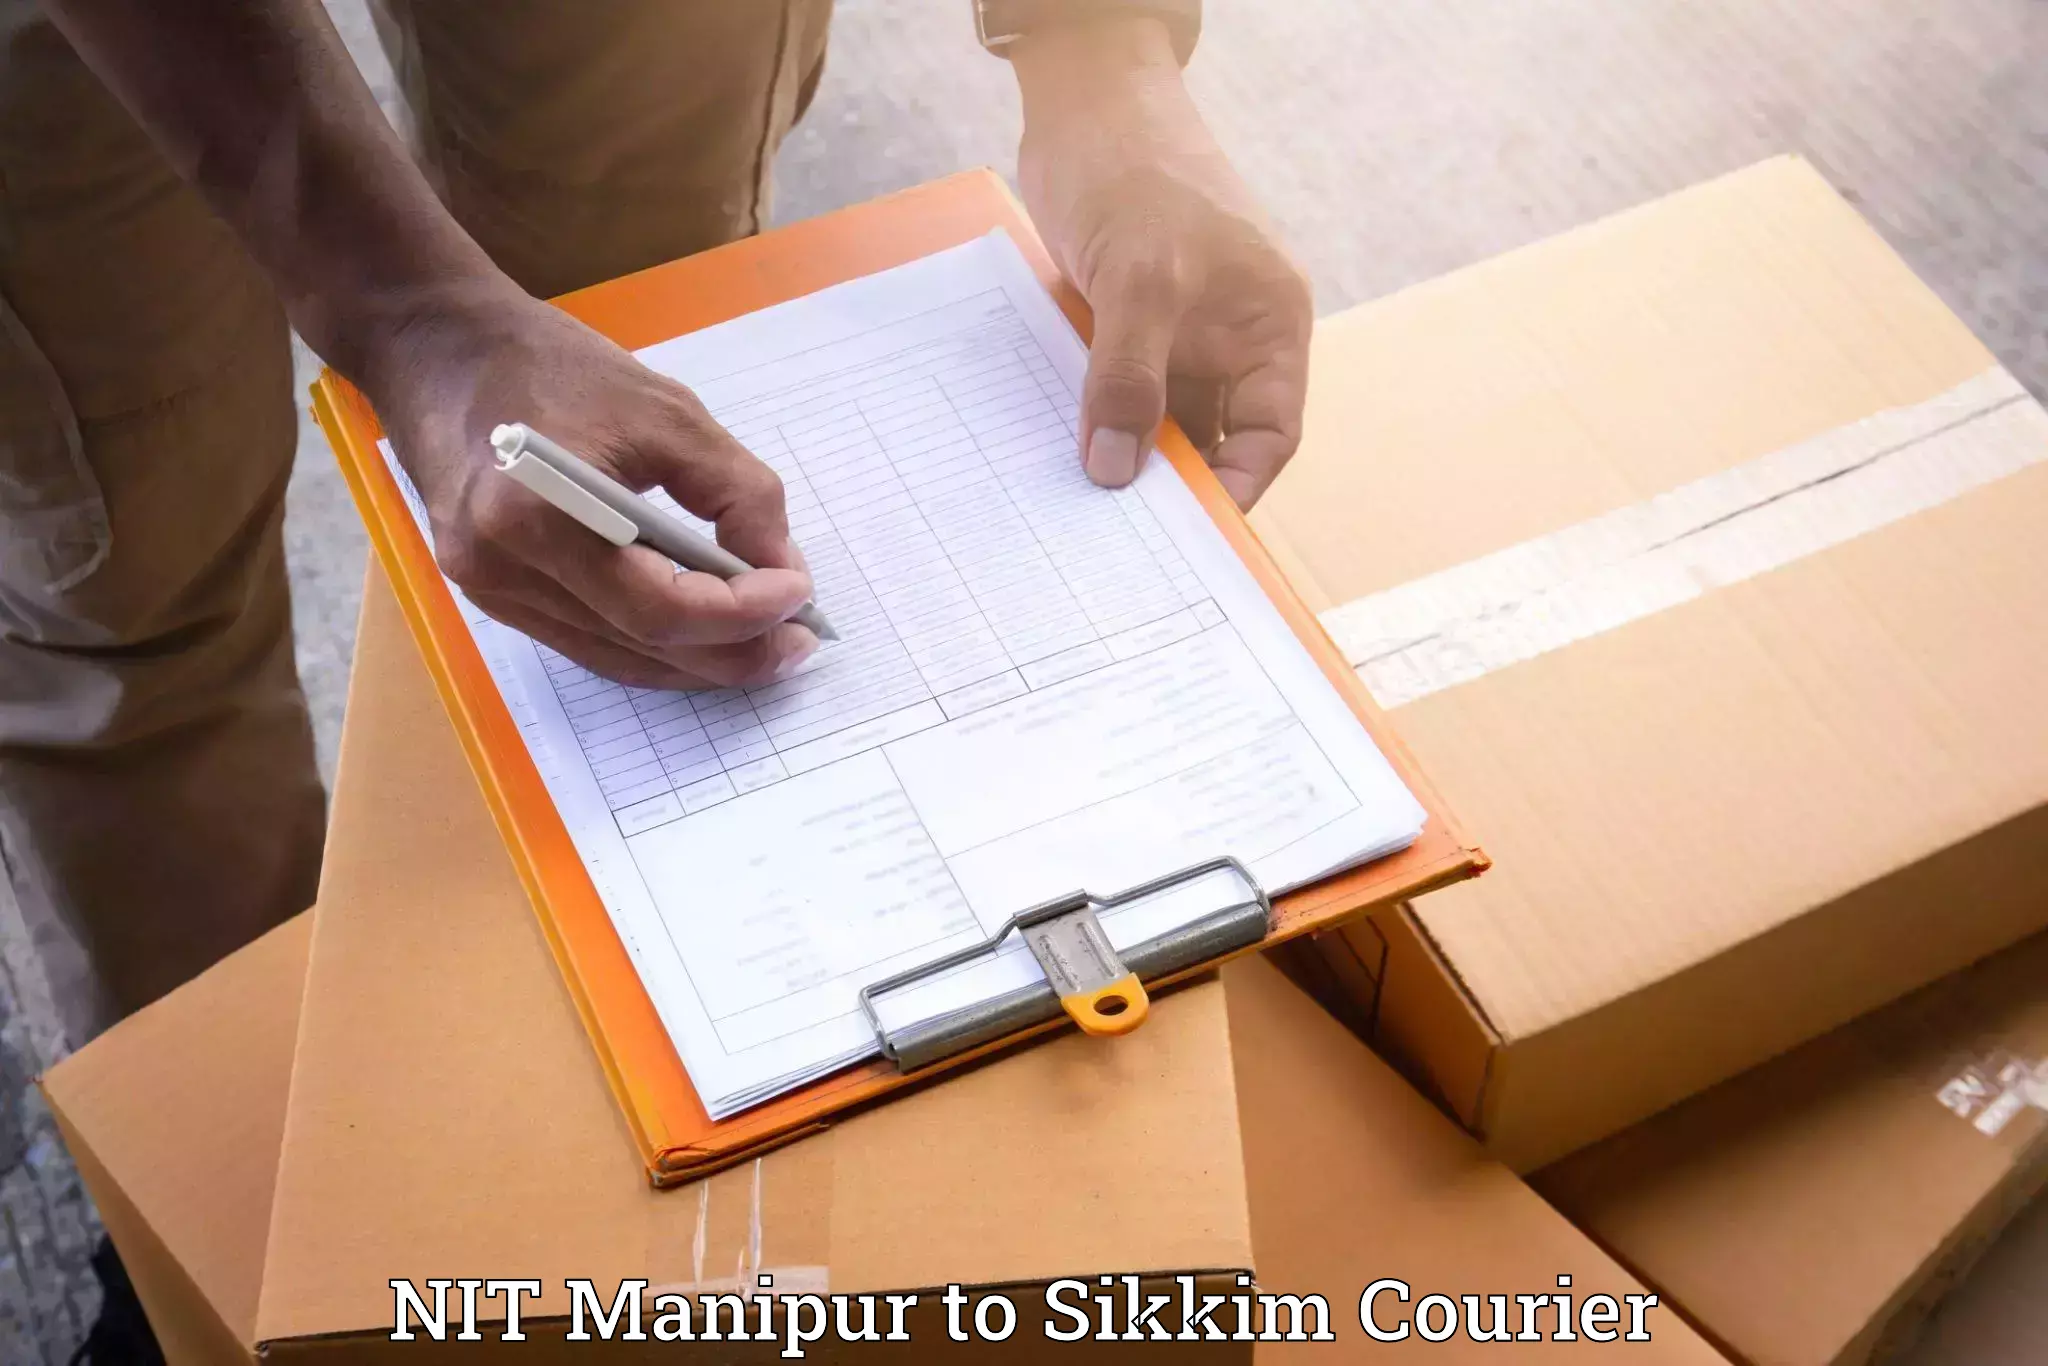 Moving and storage services NIT Manipur to Gangtok